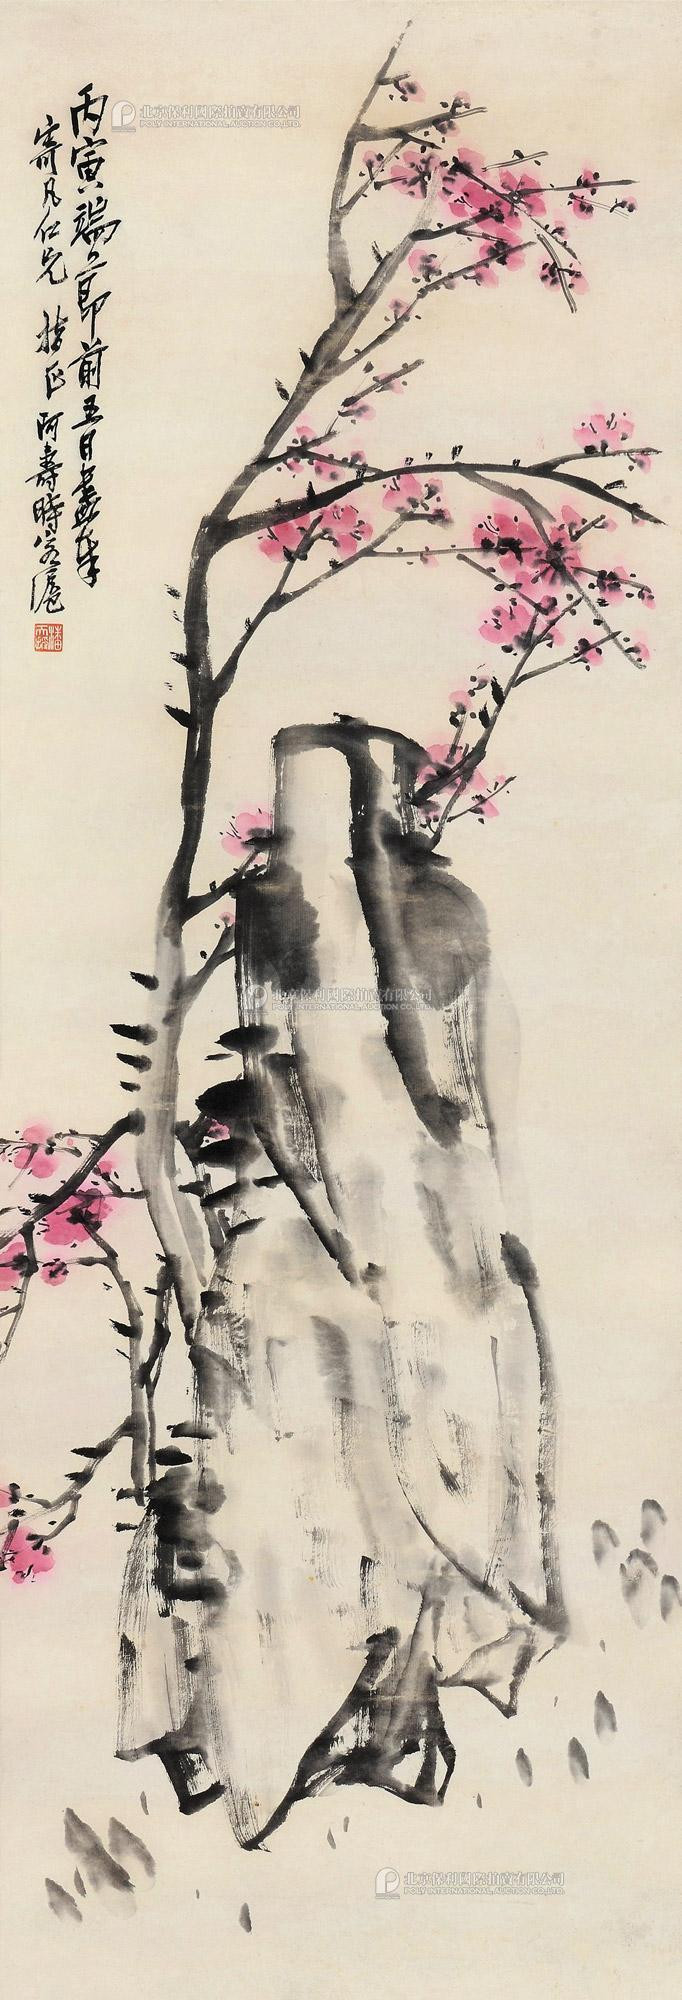 Plum Blossom and Rock